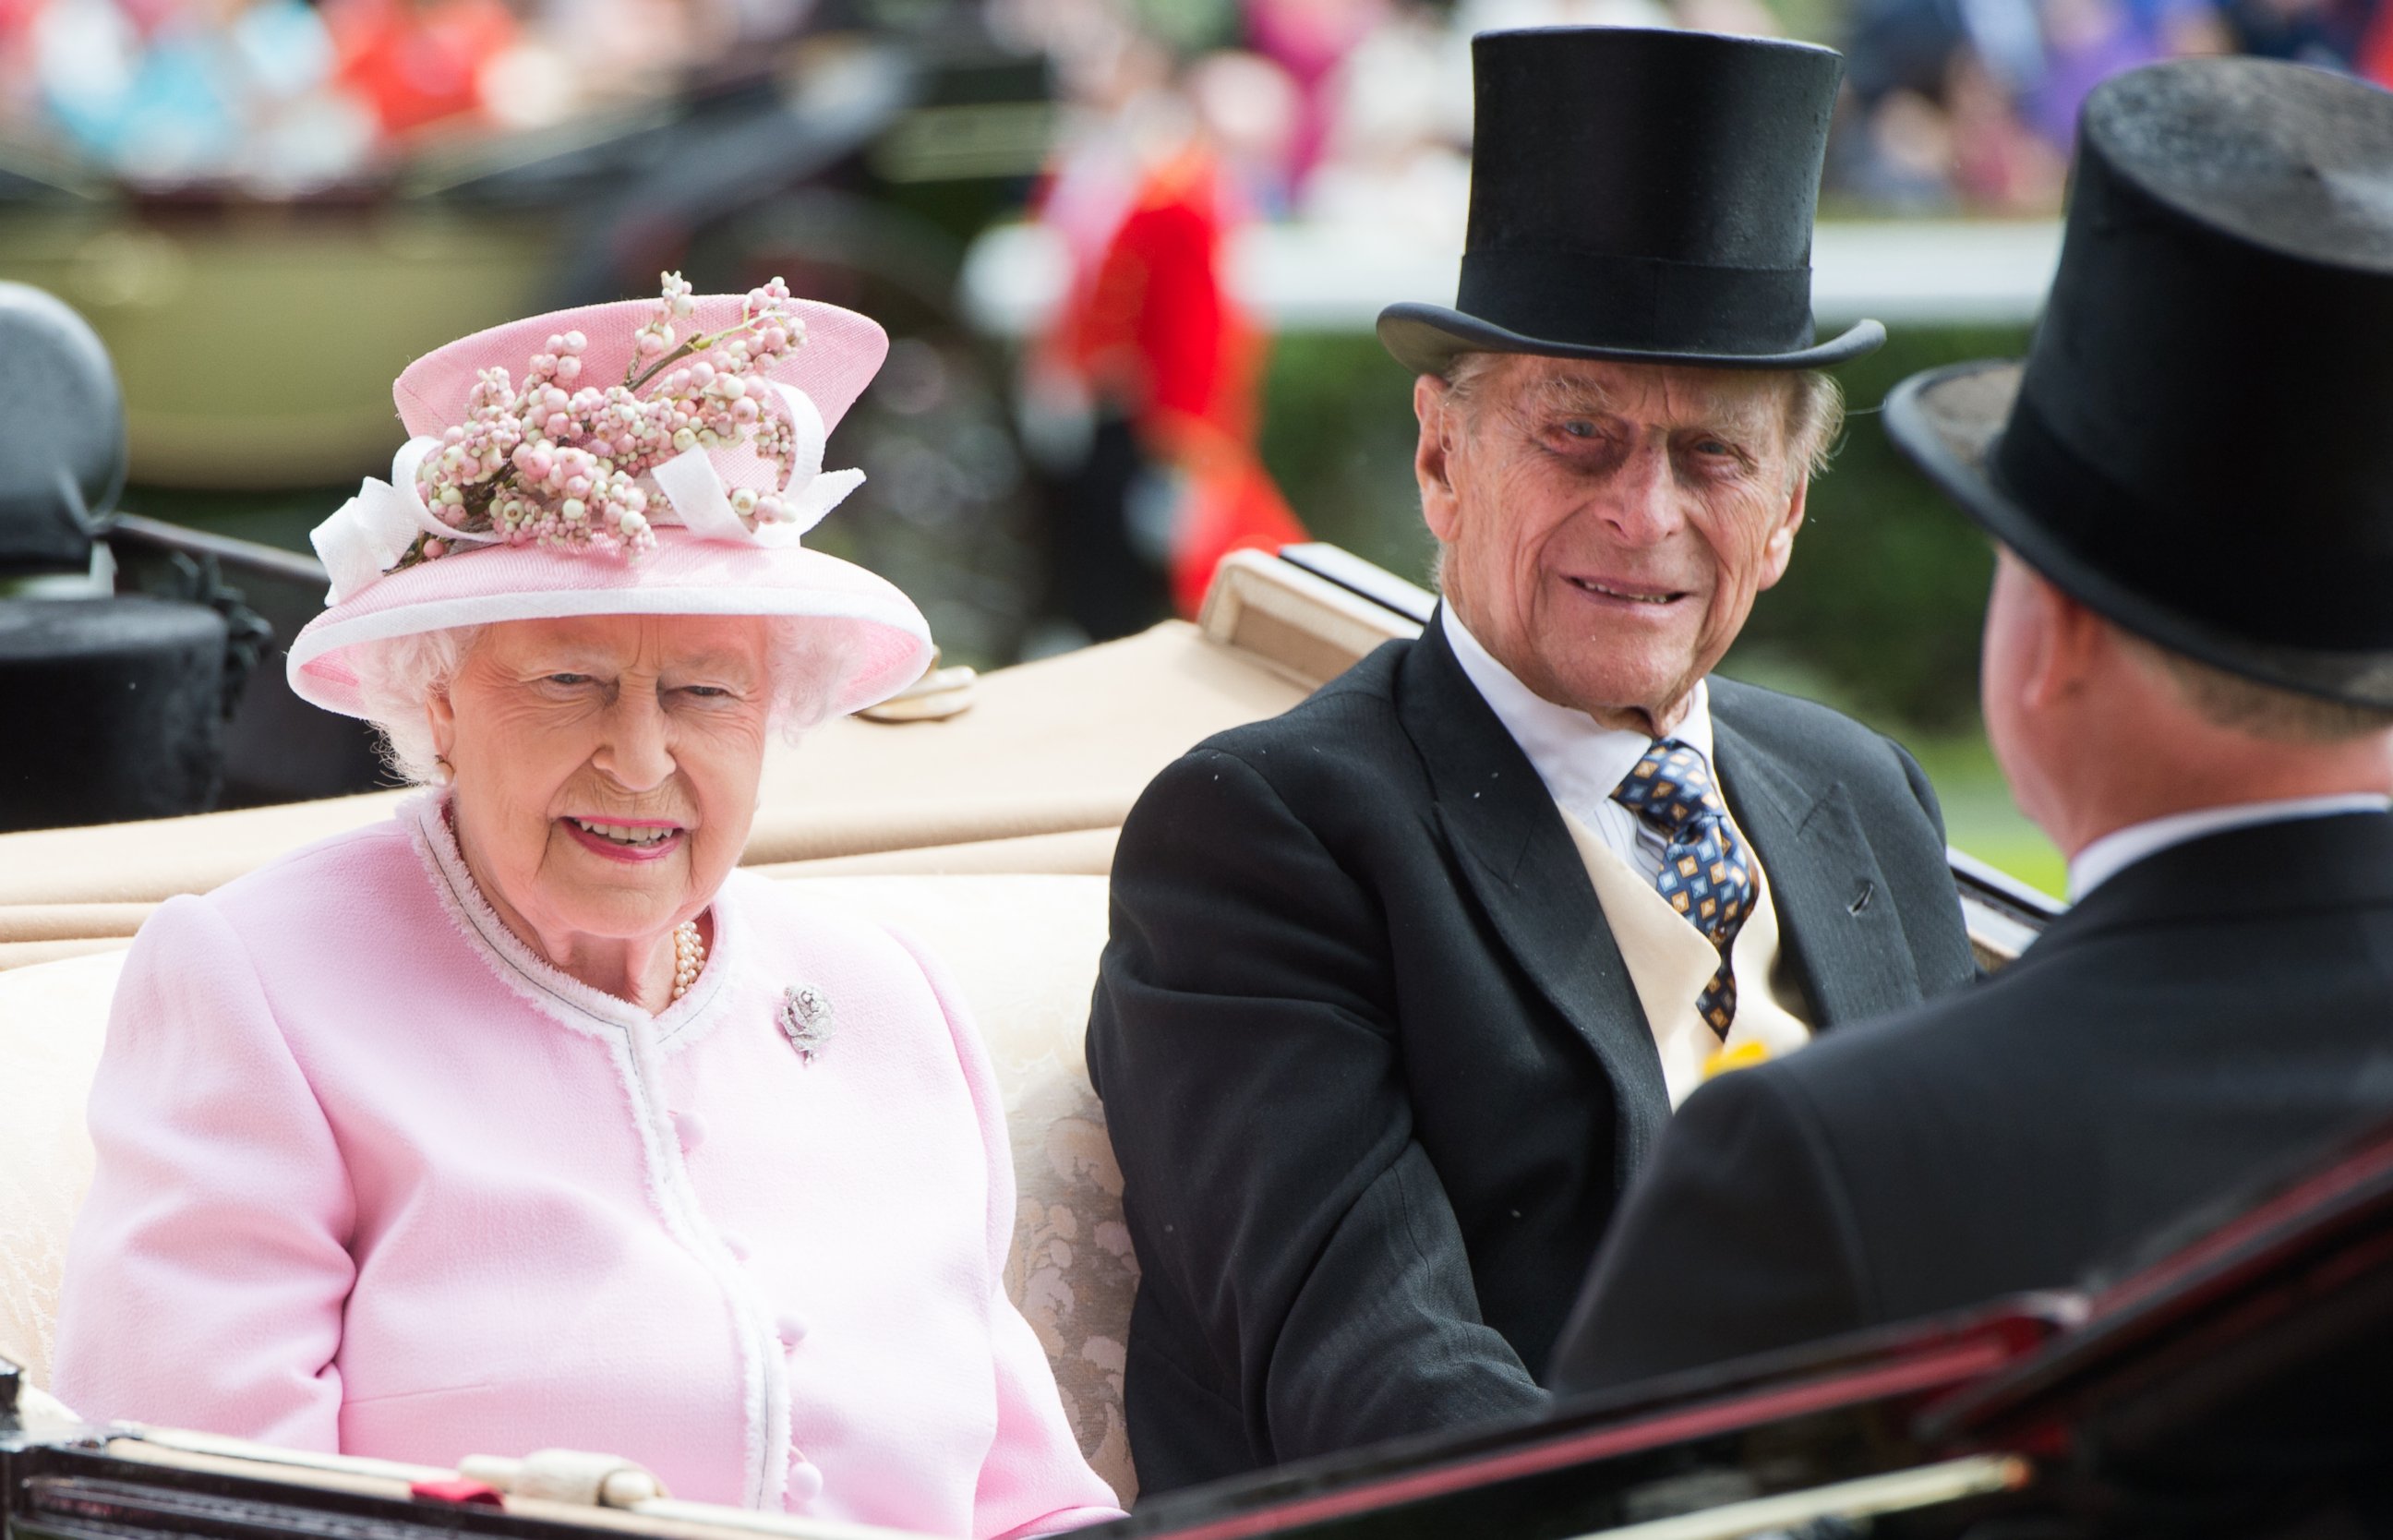 PHOTO: Queen Elizabeth II and Prince Philip, Duke of Edinburgh arrive by carriage on day 2 of Royal Ascot at Ascot Racecourse on June 8, 2016 in Ascot, England. 